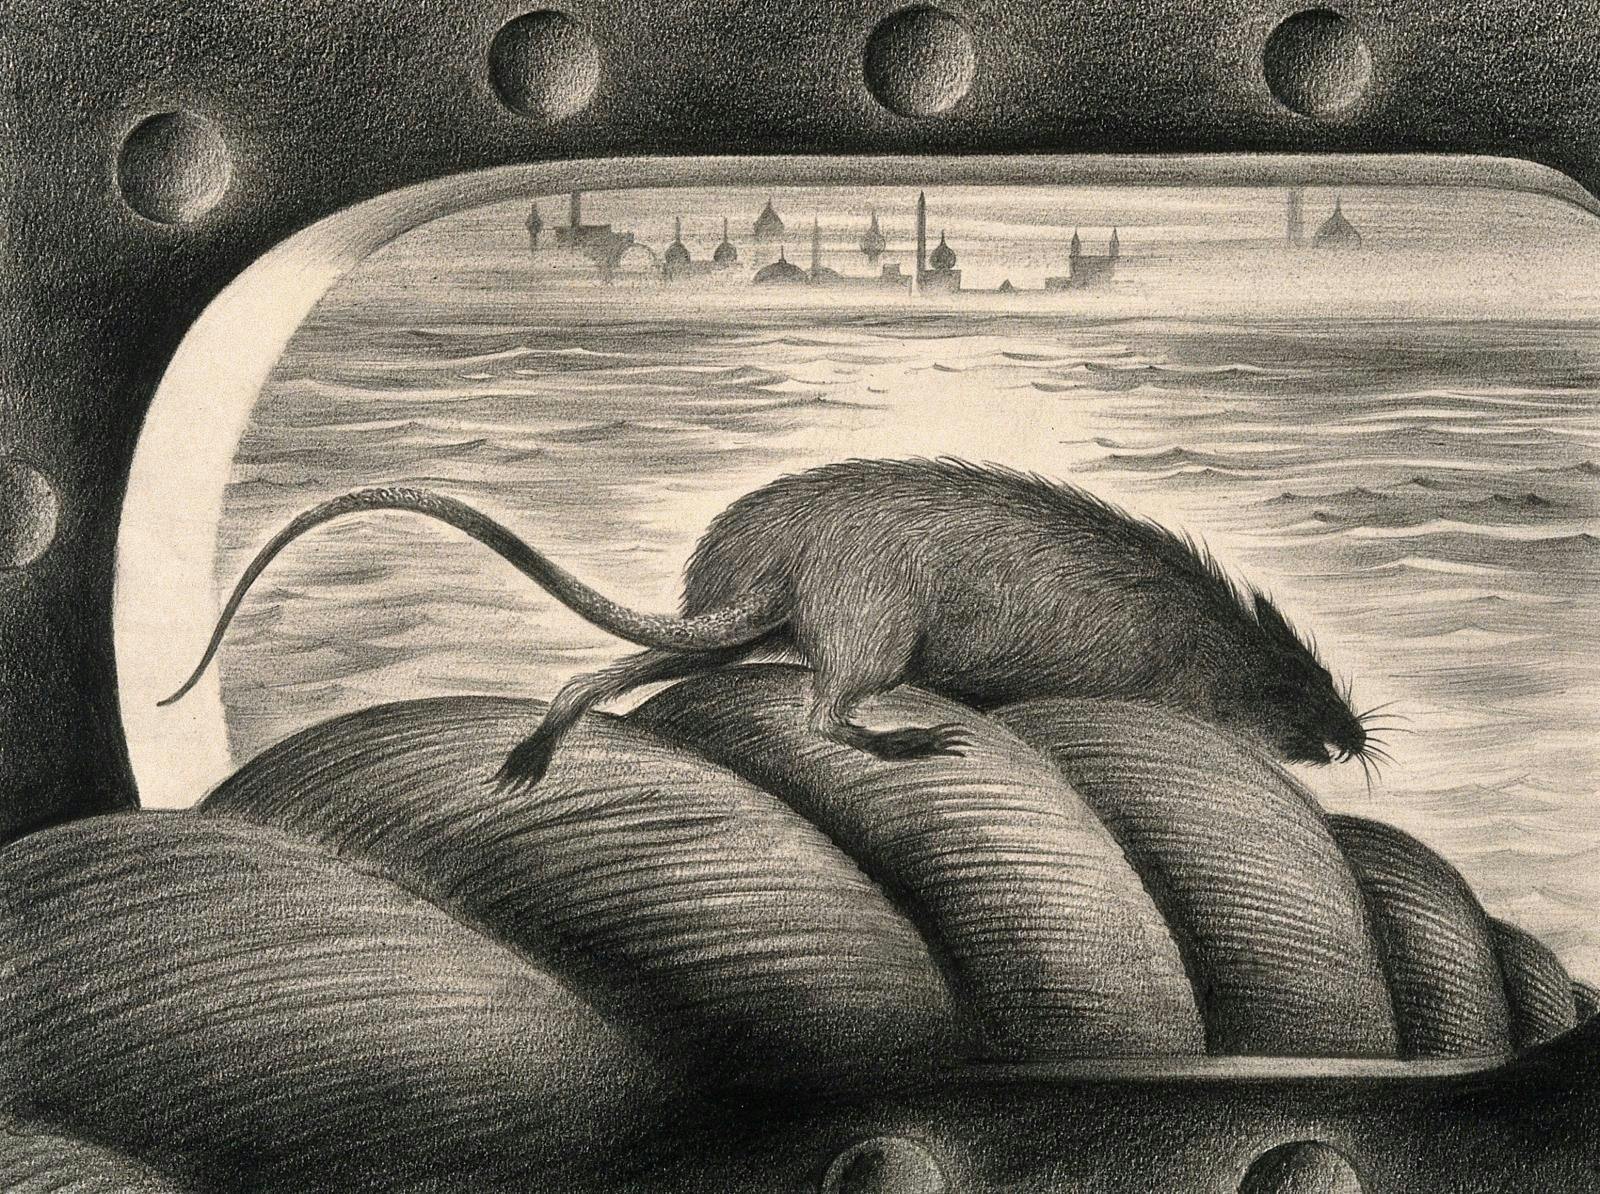 Dis-Ease still: Rat leaving the mooring rope of a ship (Albert Lloyd Tarter illustration, produced for an unfinished Hollywood educational film in the 1940s, Wellcome Collection).